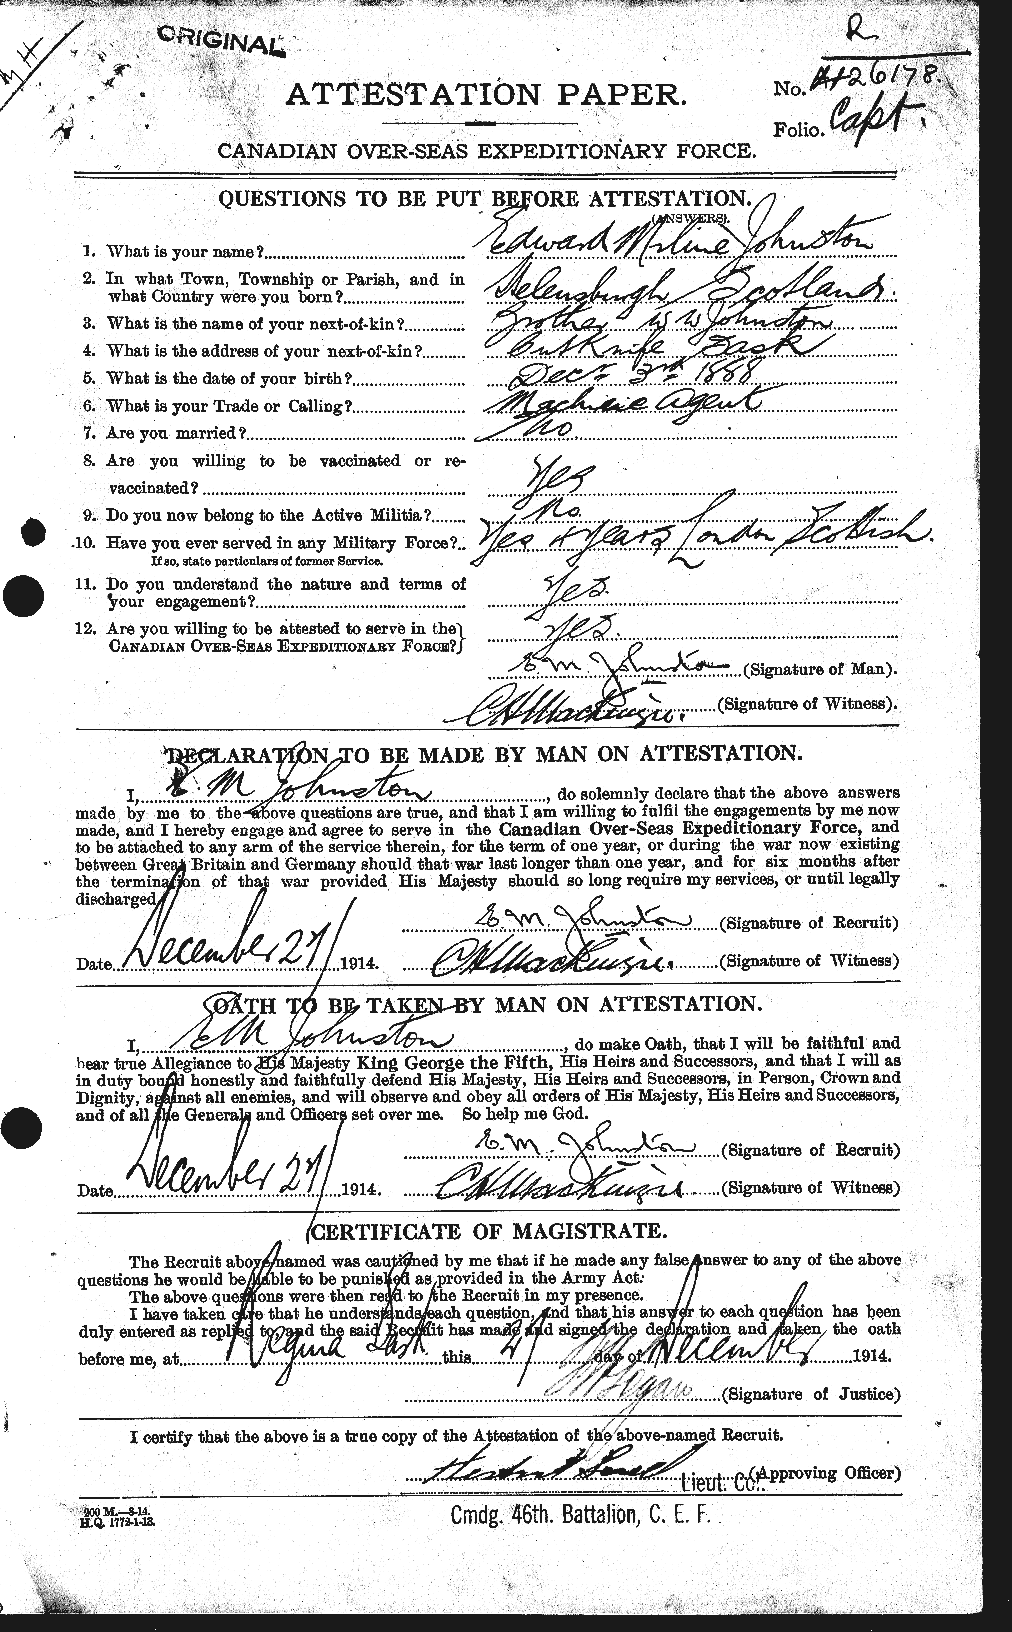 Personnel Records of the First World War - CEF 423231a